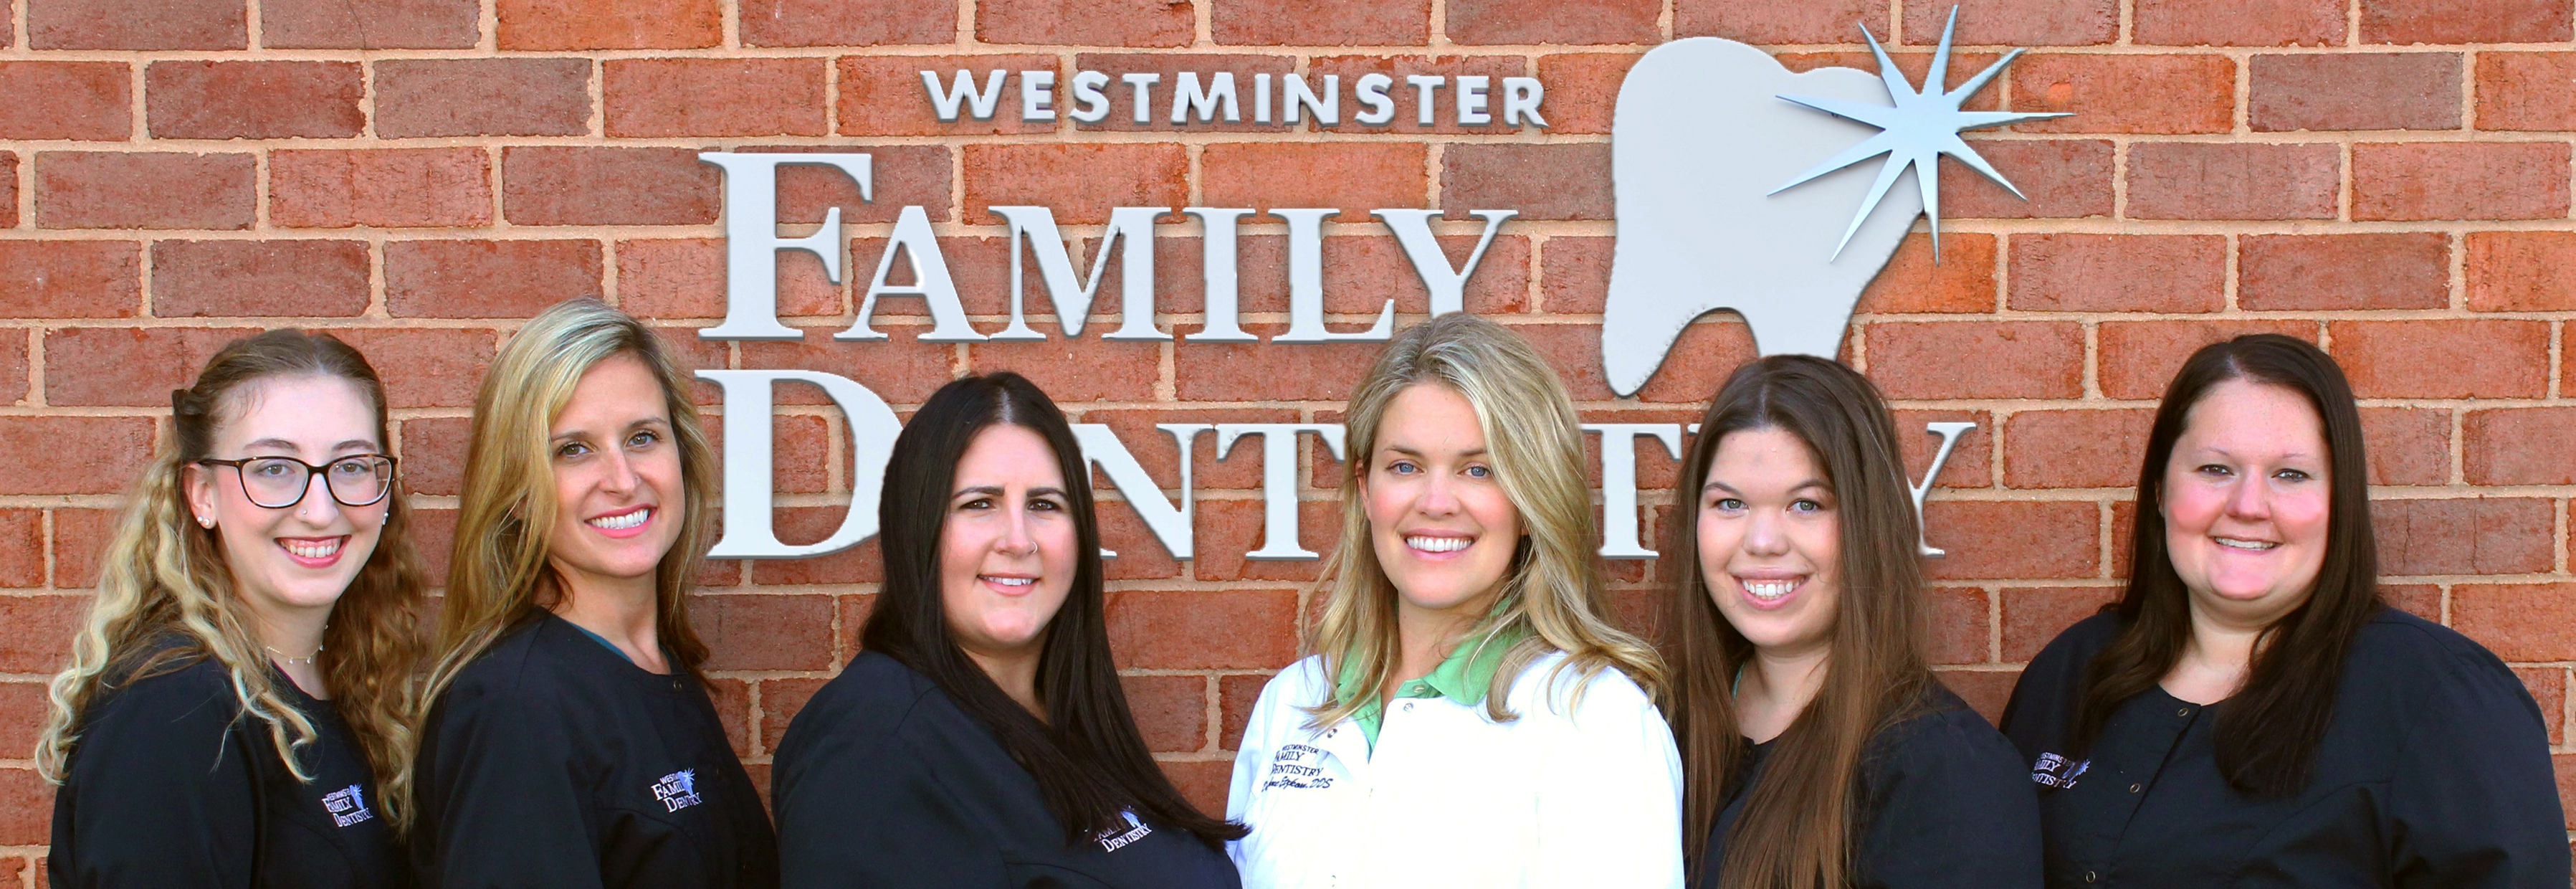 Meet Dr. Etzkorn's staff at Westminster Family Dentistry in Westminster, MD